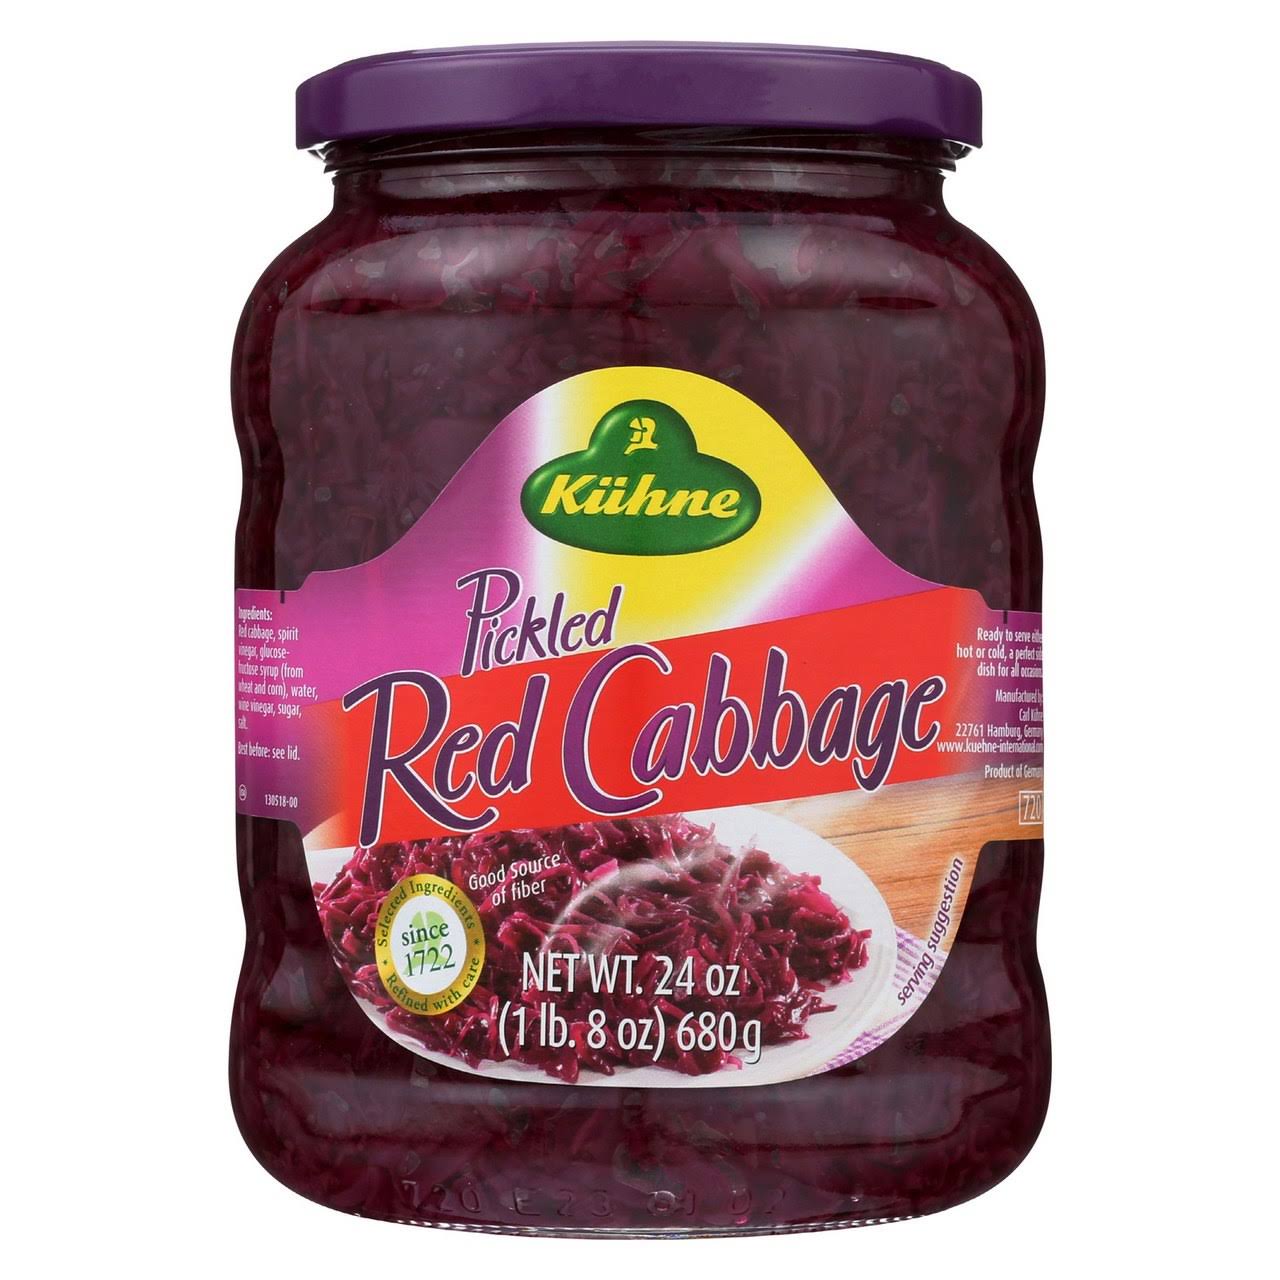 Kuhne Red Cabbage - 24 oz